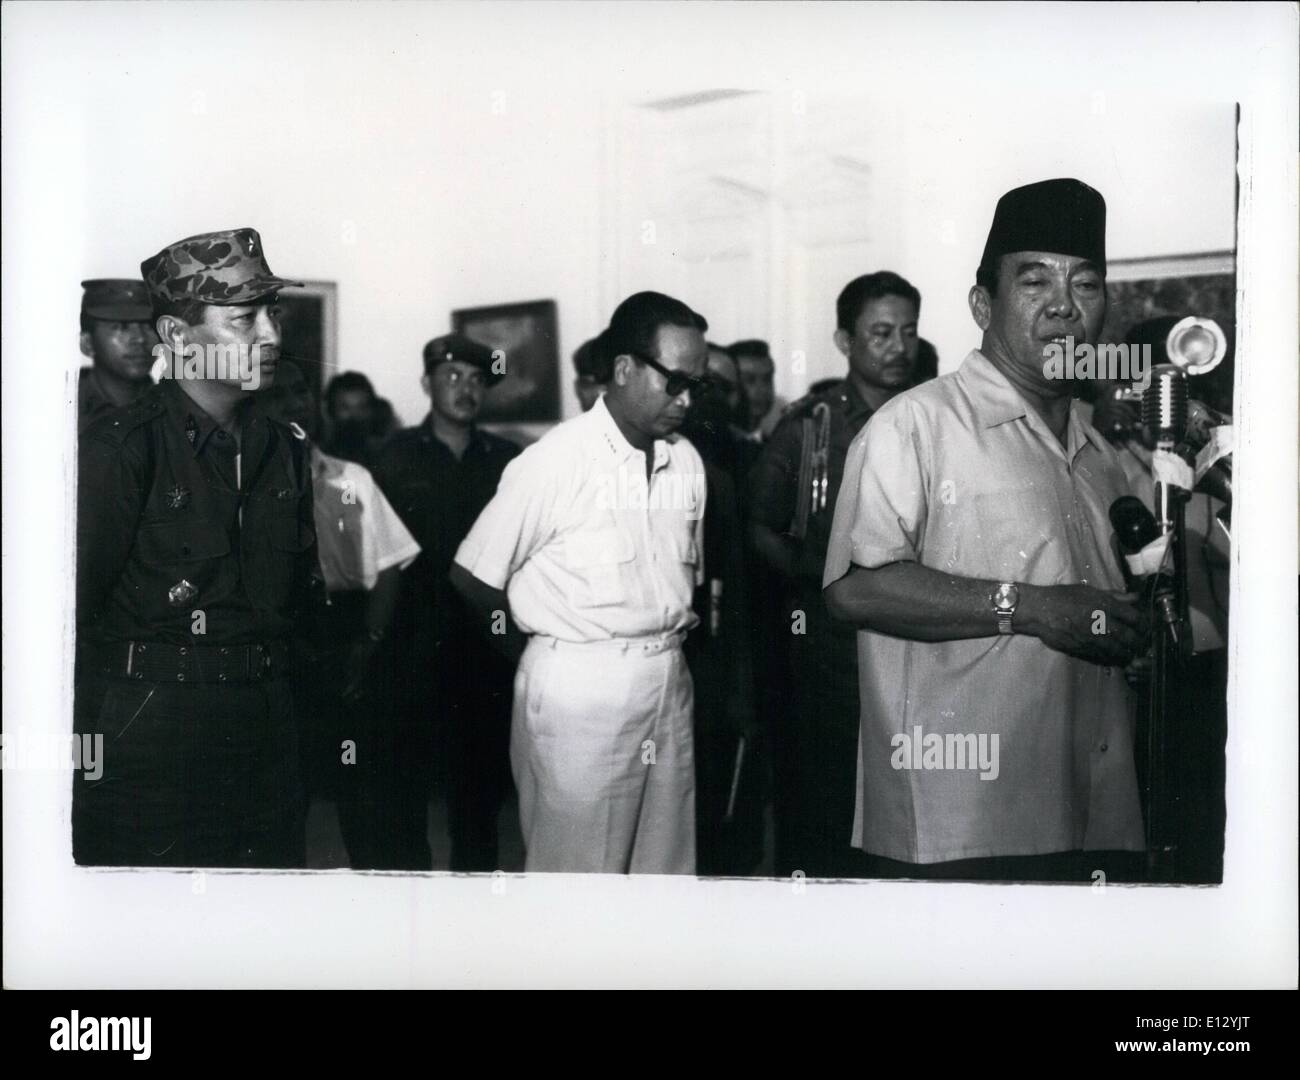 Feb. 25, 2012 - President Sukarno announces October 14, 1965 appointment of Maj. Gen. Suharto (left) as Army Chief. Suharto replaces Lt. gen Achamd Yani, who was killed by Communists in aborted coup of Oct. 1, 1965. In center is Dr. Subandrio, 1st Deputy Premier. Ceremony is at Istana Palace, Djakarta. Sukarno made a deal with the military (who routed the Somminists) to appoint Suharto providing that Subandrio stayed in the Cabinet (the military wanted Subandrio out). Behind Sukarno: his chief bodyguard, Brig Gen. Sabur-who was later ousted by Suharto on 3/29/66, and ultimately arrested Stock Photo